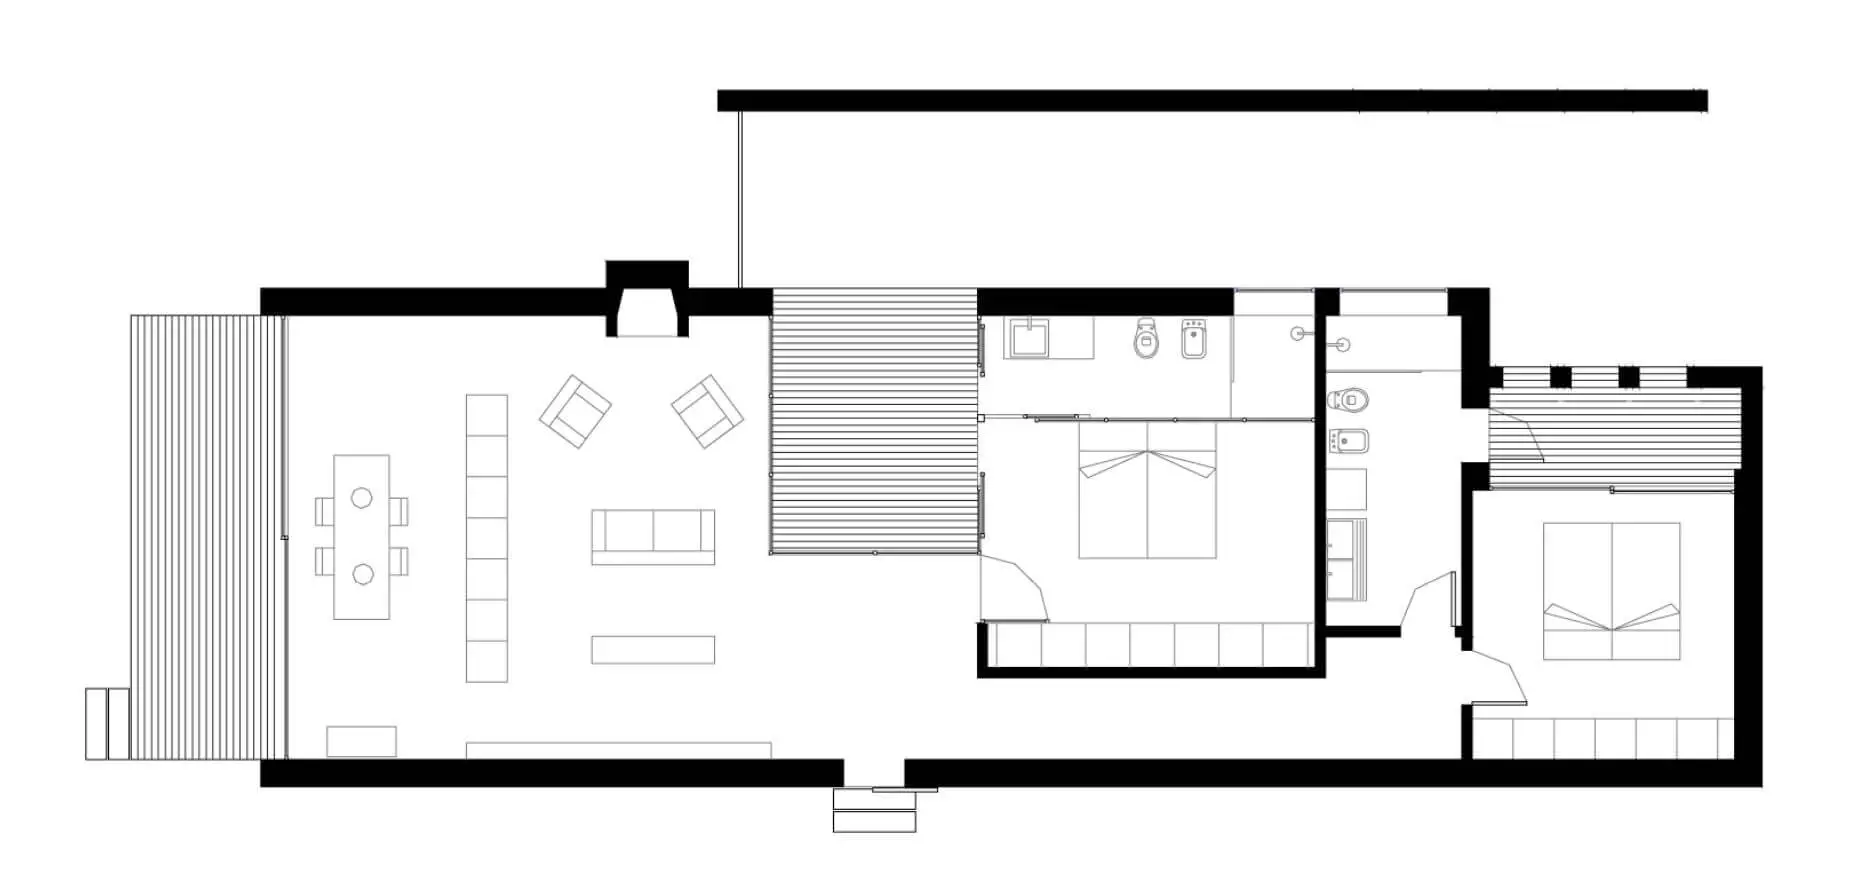 Small two-bedroom house plan